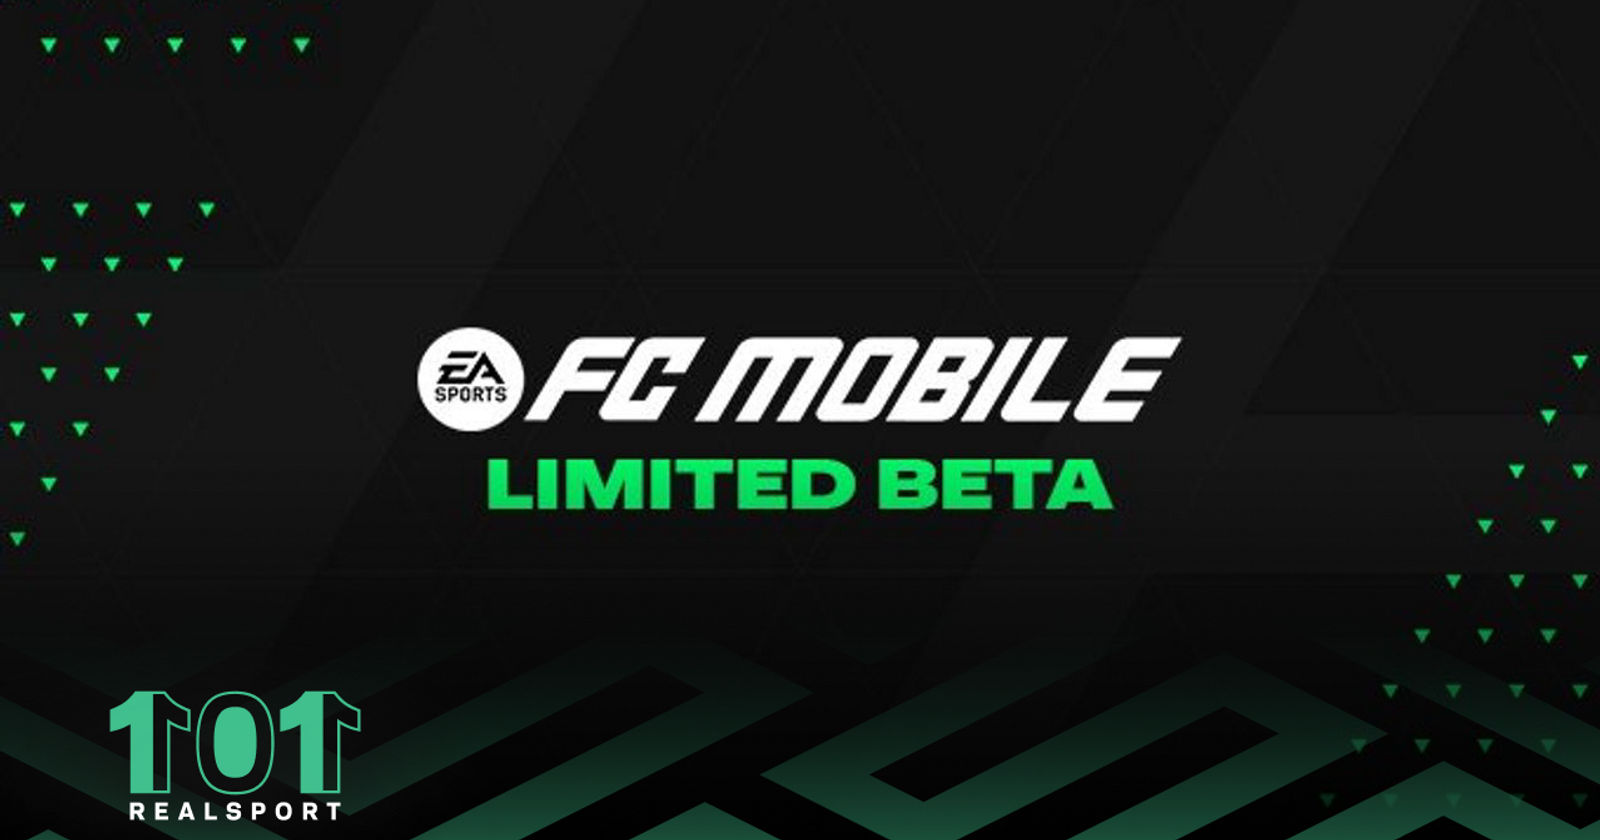 HOW TO DOWNLOAD FIFA MOBILE 22 BETA 